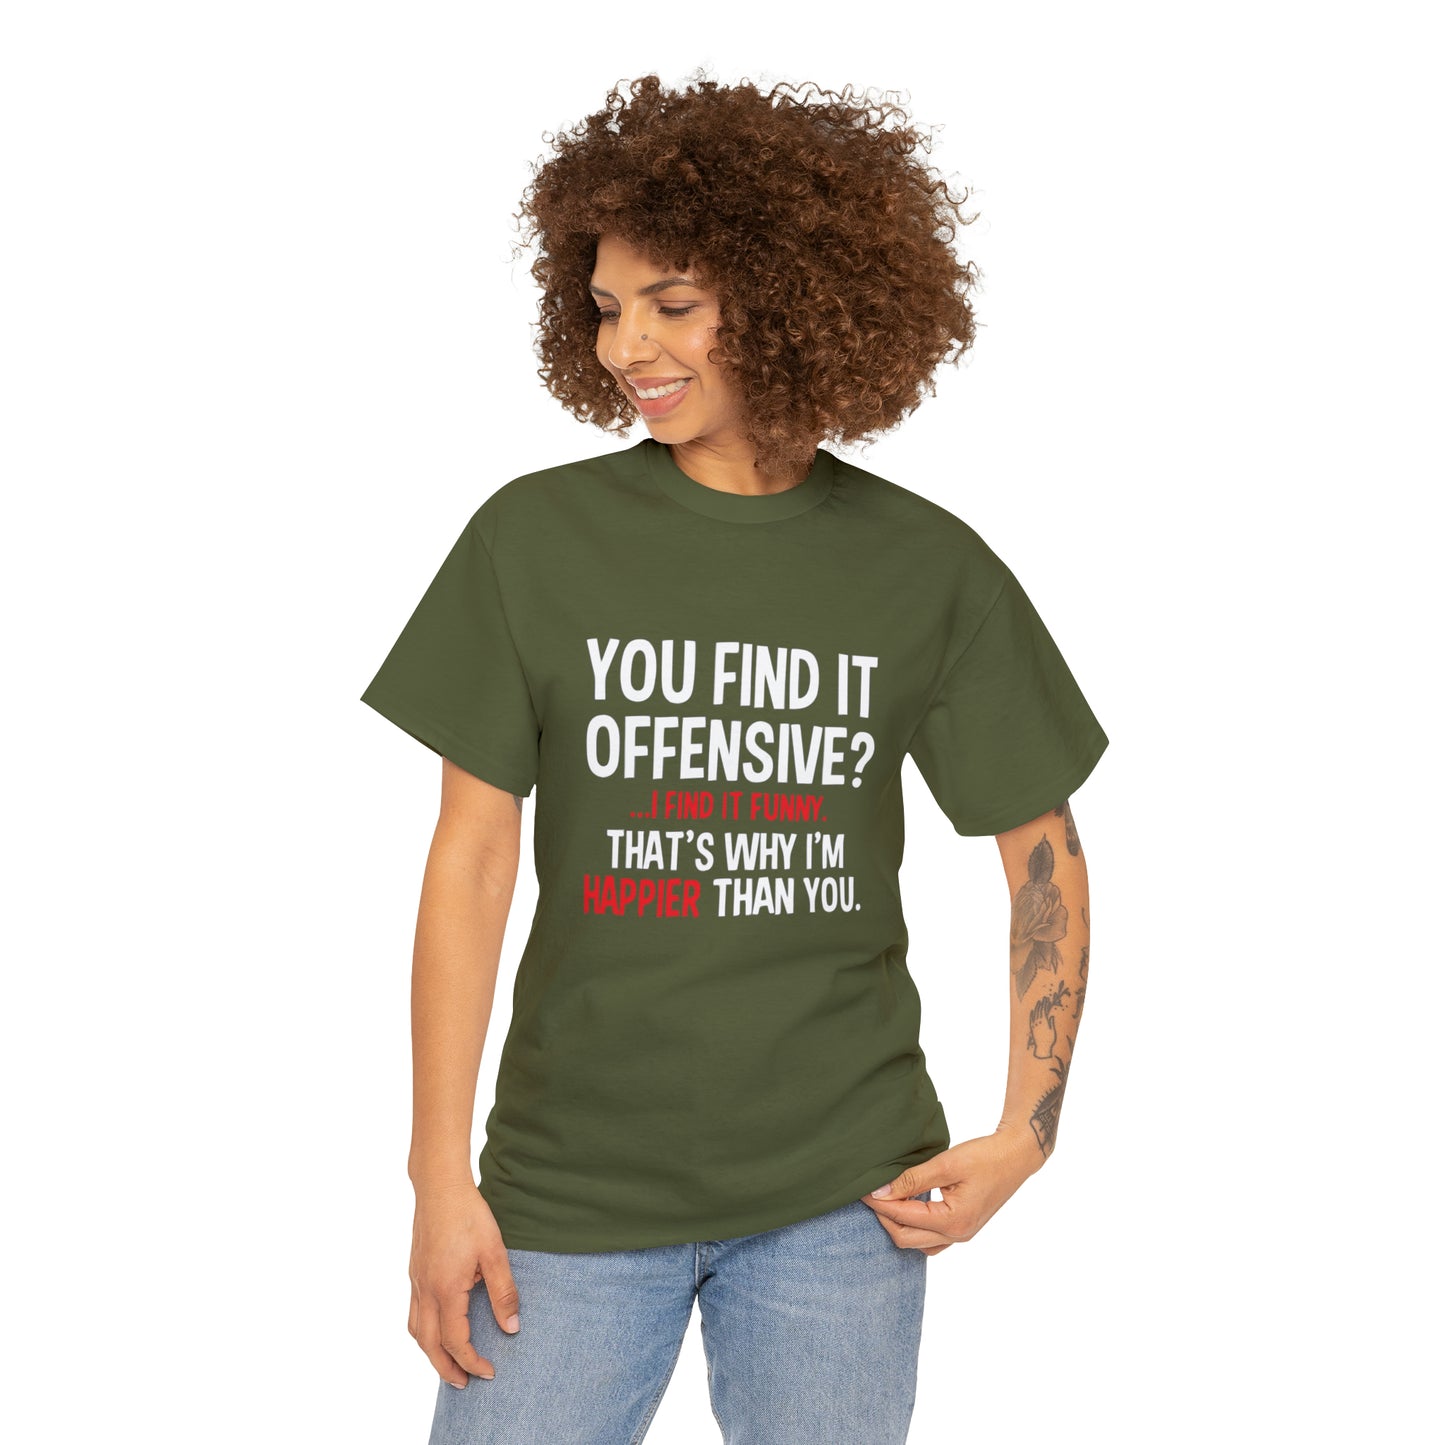 You Find It Offensive? Funny T-Shirt